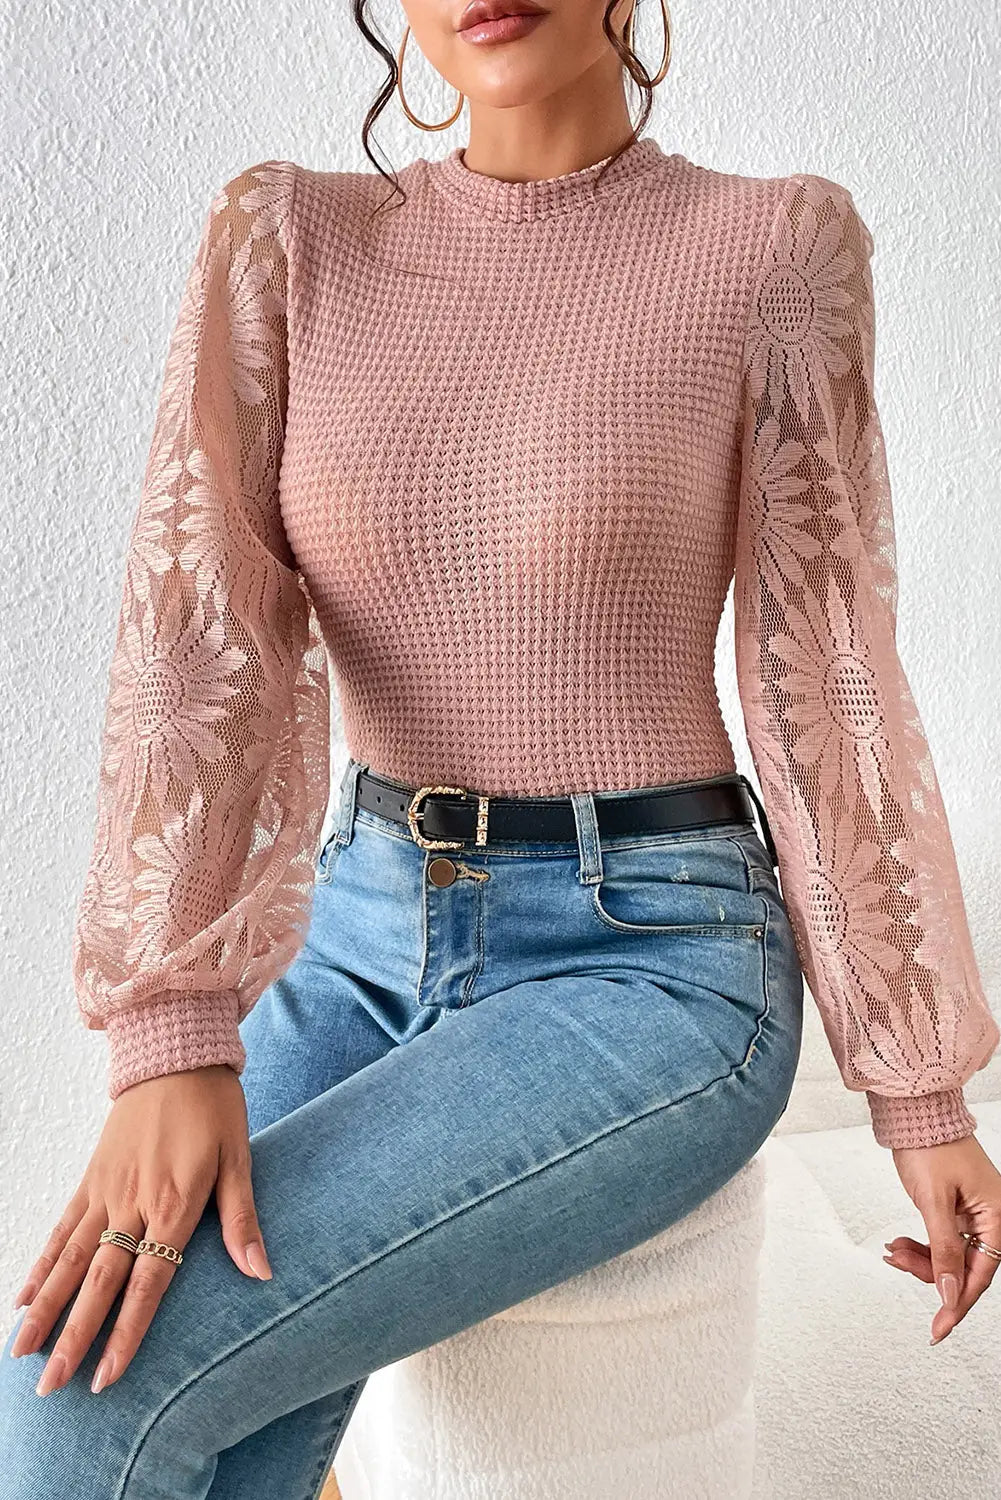 Peach blossom sunflower mesh bubble sleeve waffle knit top - long tops